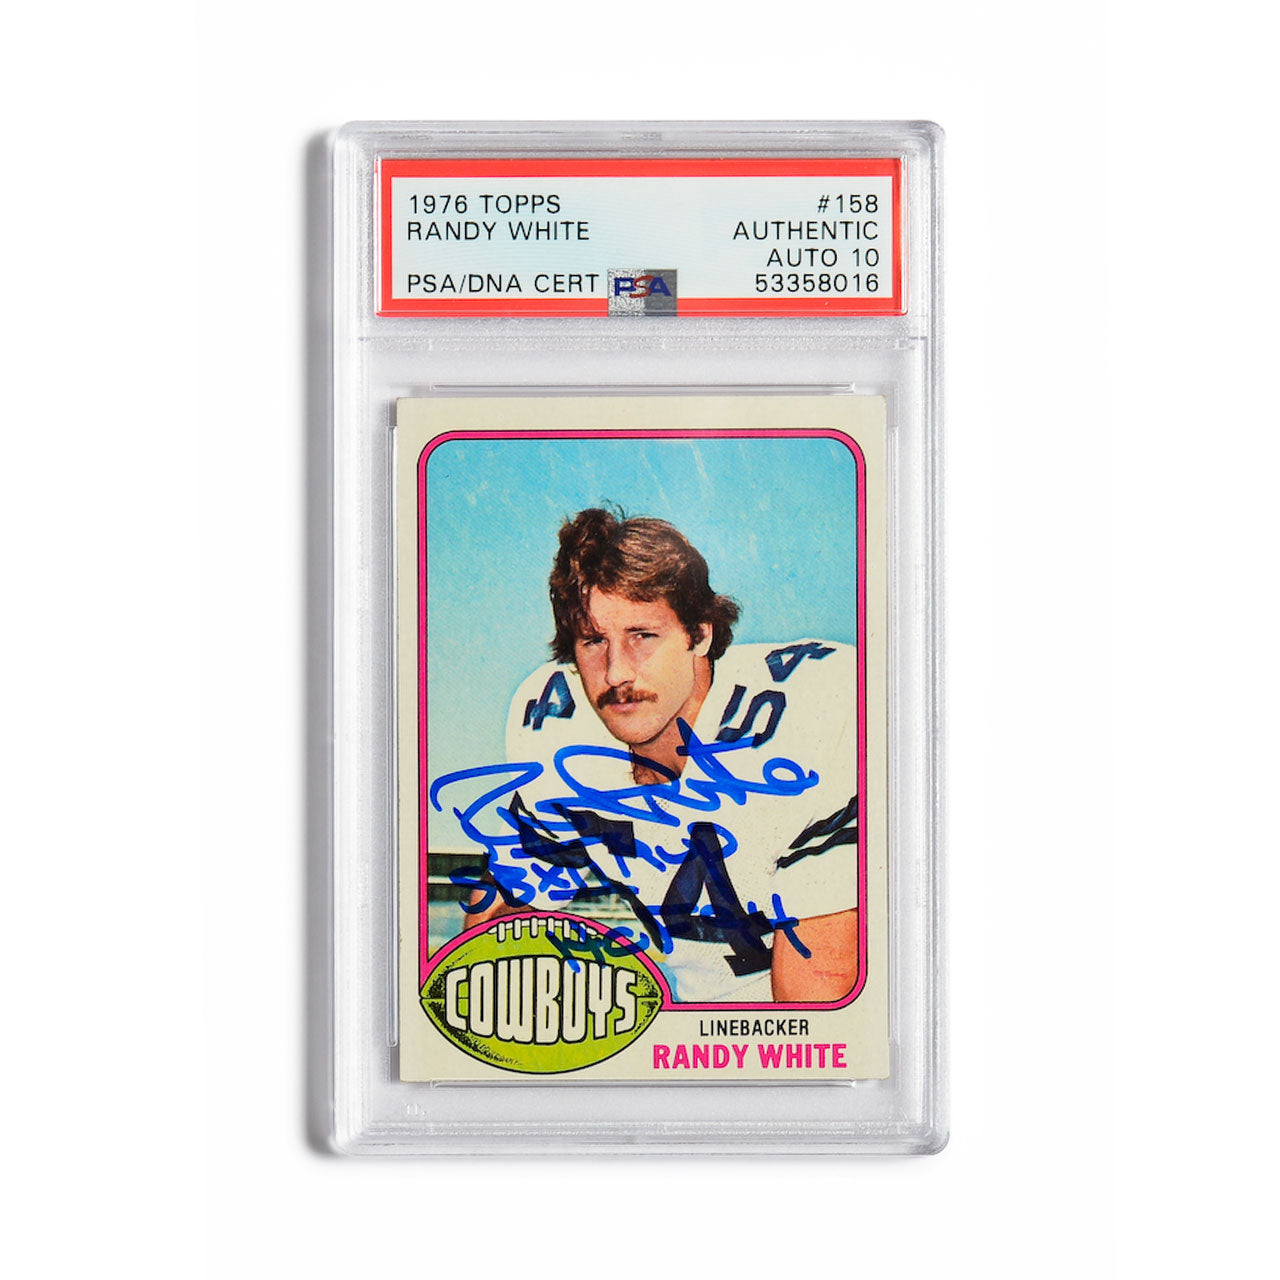 1976 Topps Randy White Autographed Rookie Card